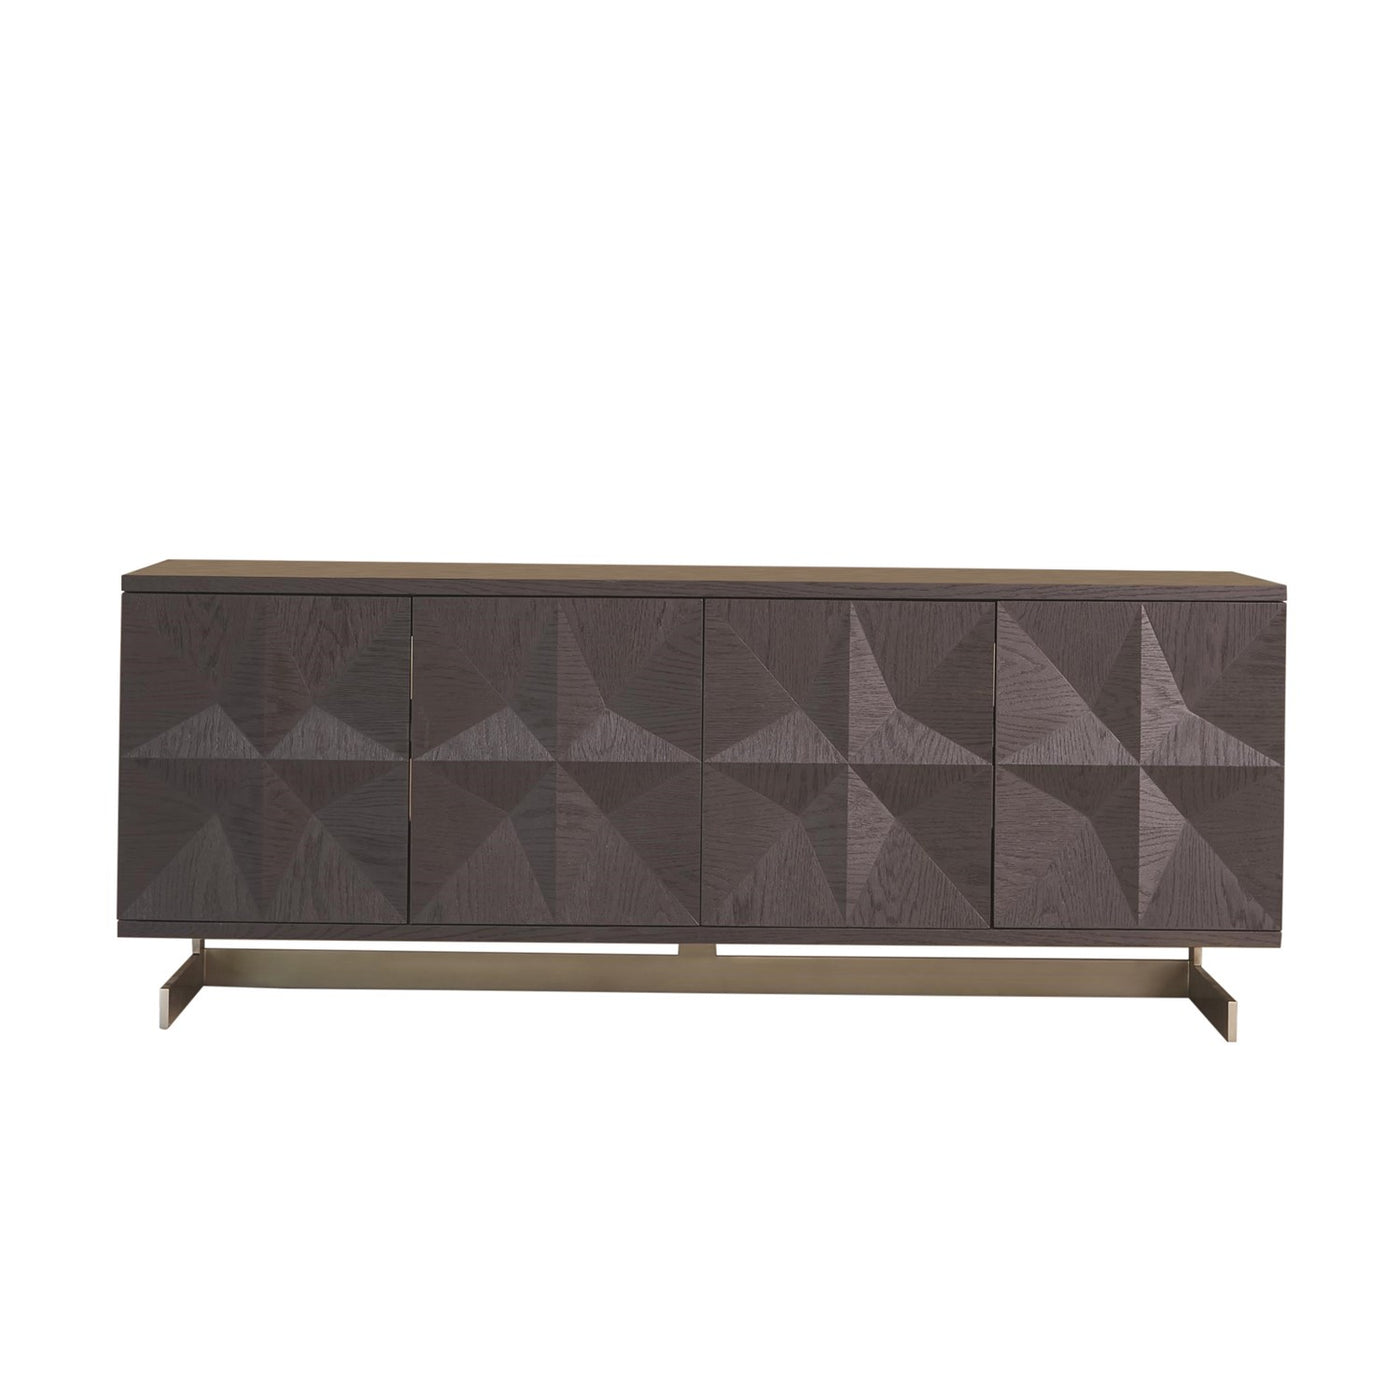 CANTILEVERED STAR MEDIA CABINET by Global Views